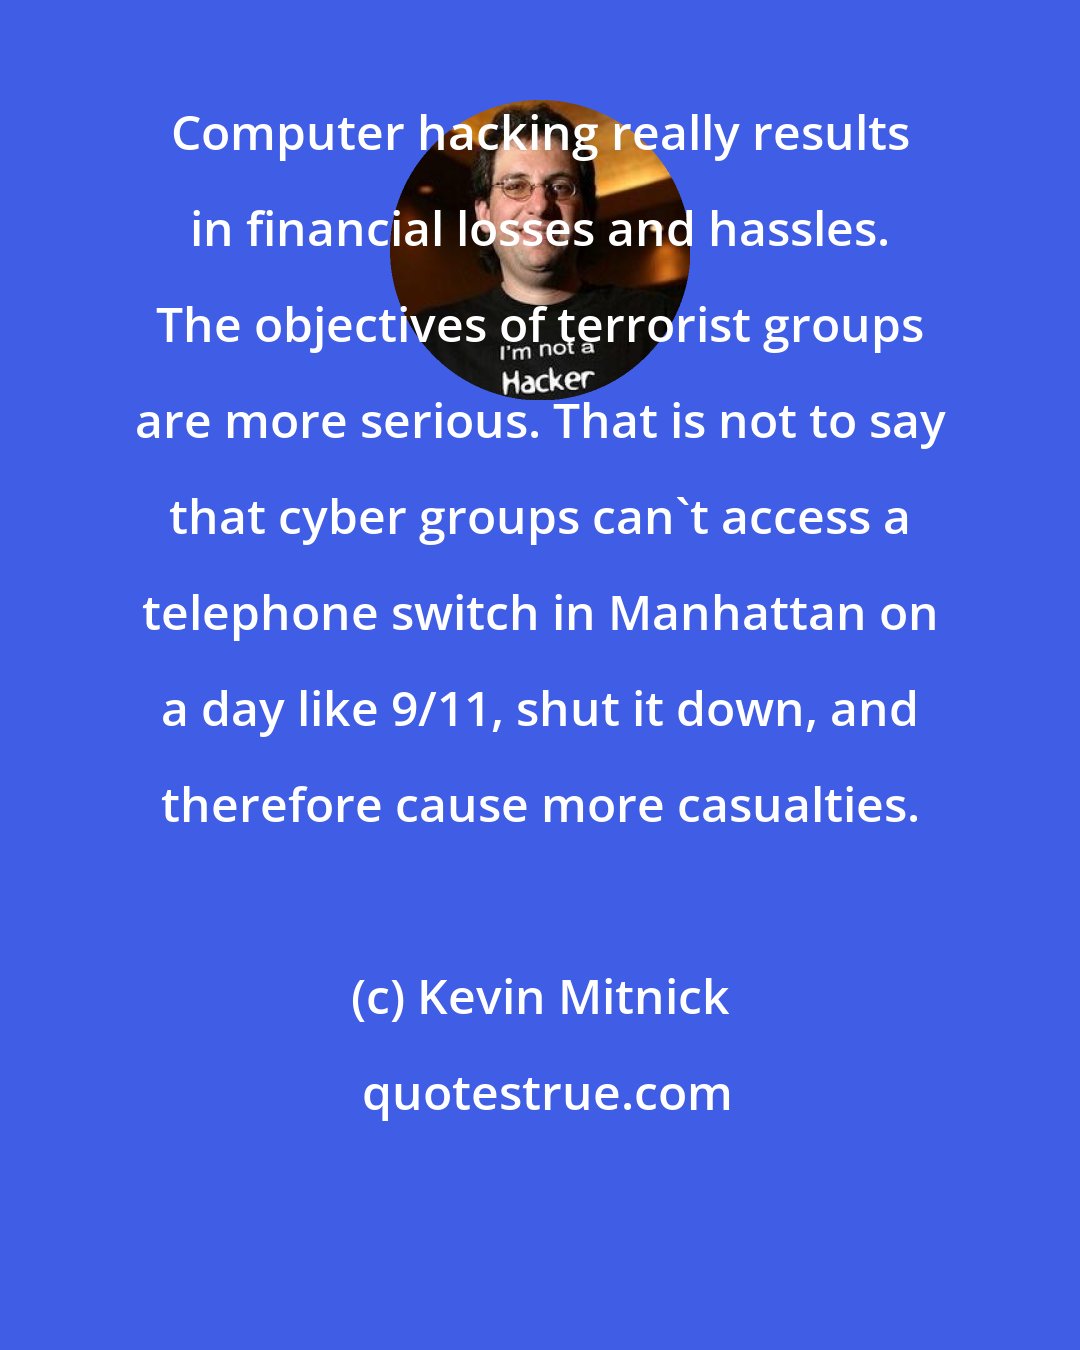 Kevin Mitnick: Computer hacking really results in financial losses and hassles. The objectives of terrorist groups are more serious. That is not to say that cyber groups can't access a telephone switch in Manhattan on a day like 9/11, shut it down, and therefore cause more casualties.